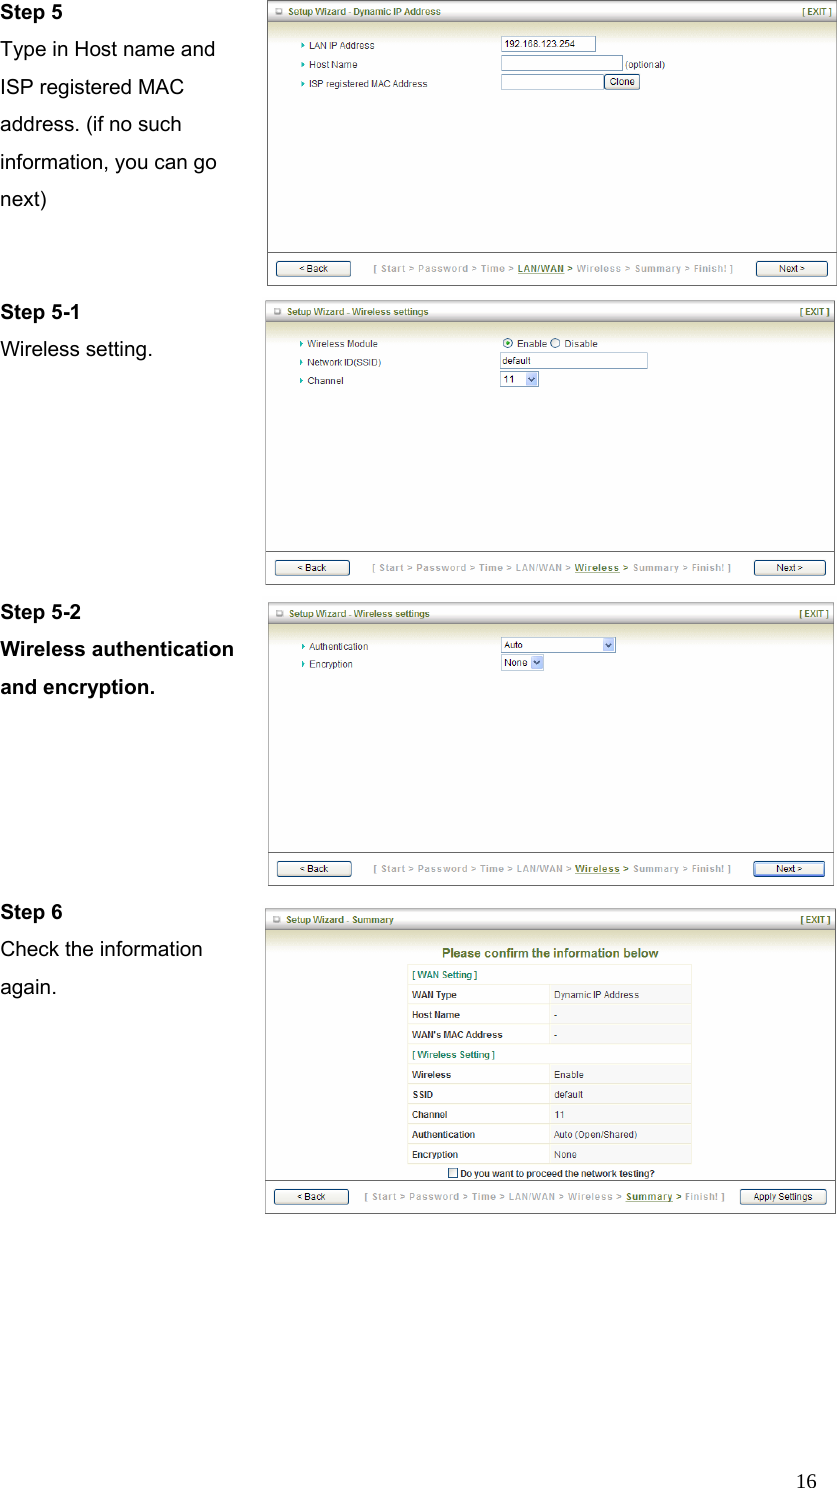  16Step 5   Type in Host name and ISP registered MAC address. (if no such information, you can go next)  Step 5-1 Wireless setting.  Step 5-2 Wireless authentication and encryption. Step 6   Check the information again.    